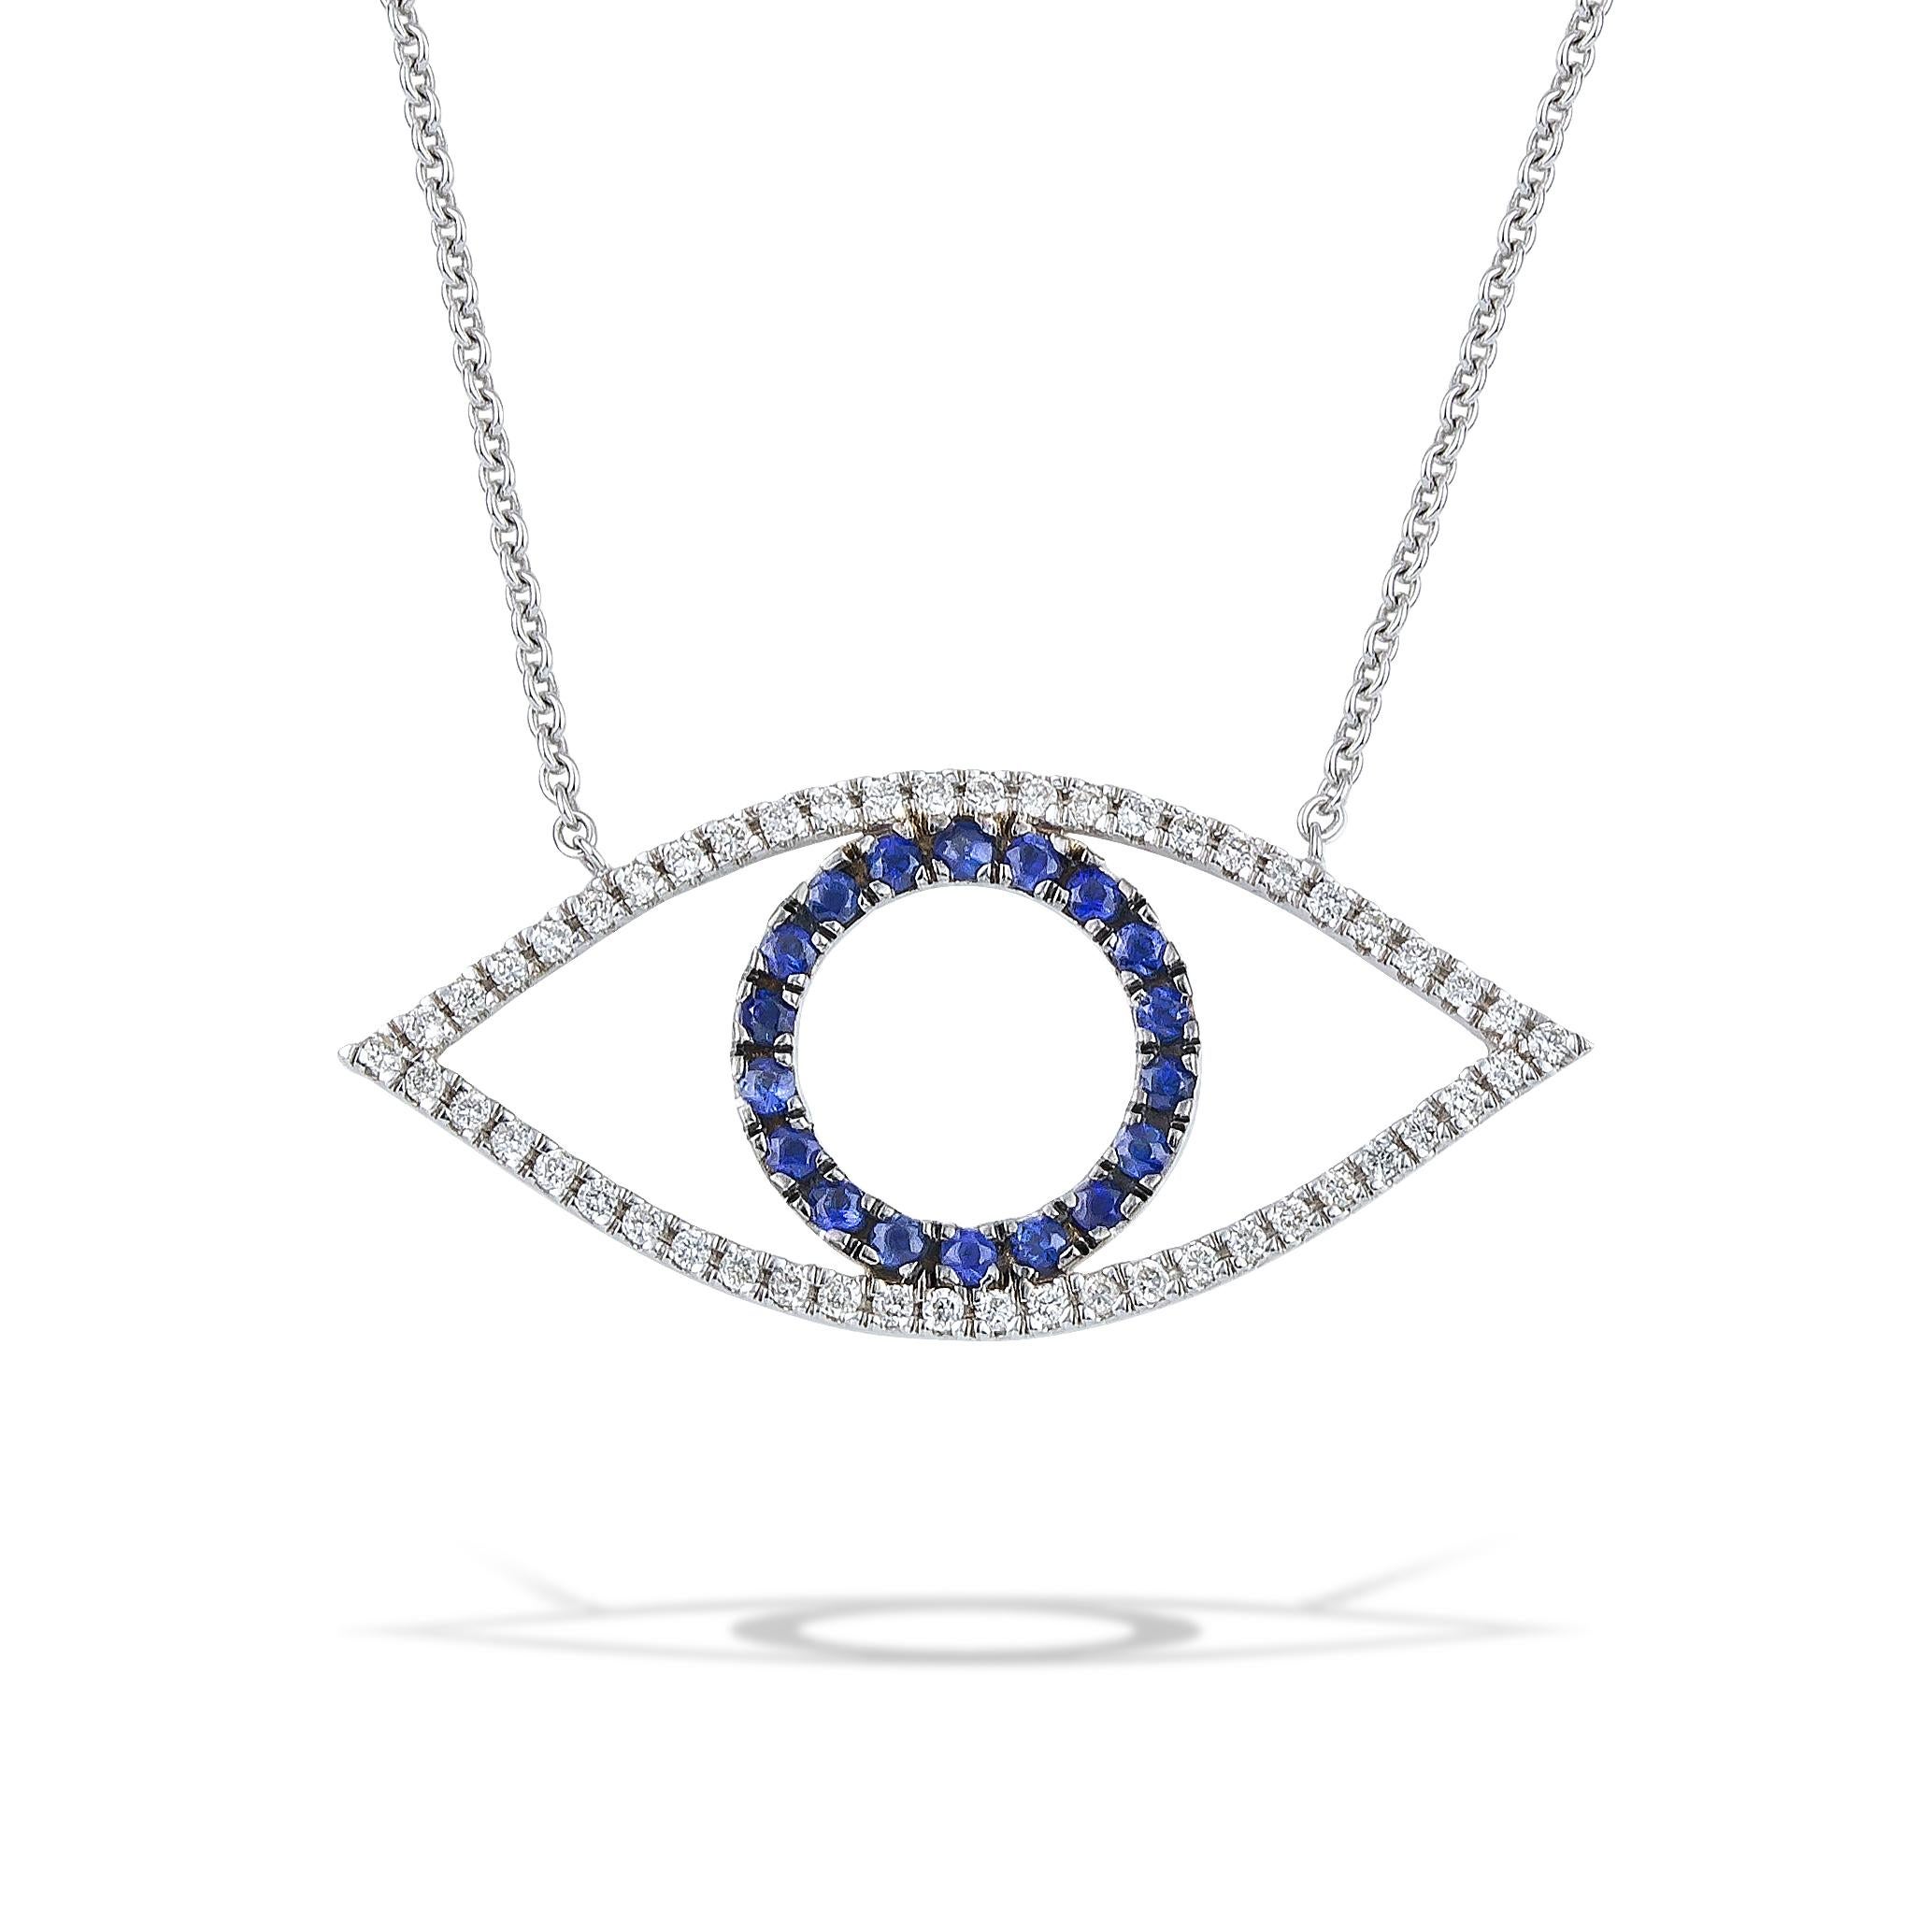 Greek Evil Eye pendant necklace handcrafted in 18Kt white gold with brilliant cut diamonds and blue sapphires.
In the greek culture the evil eye protects the one who wears it from the negative energy and stops the bad thoughts from affecting our